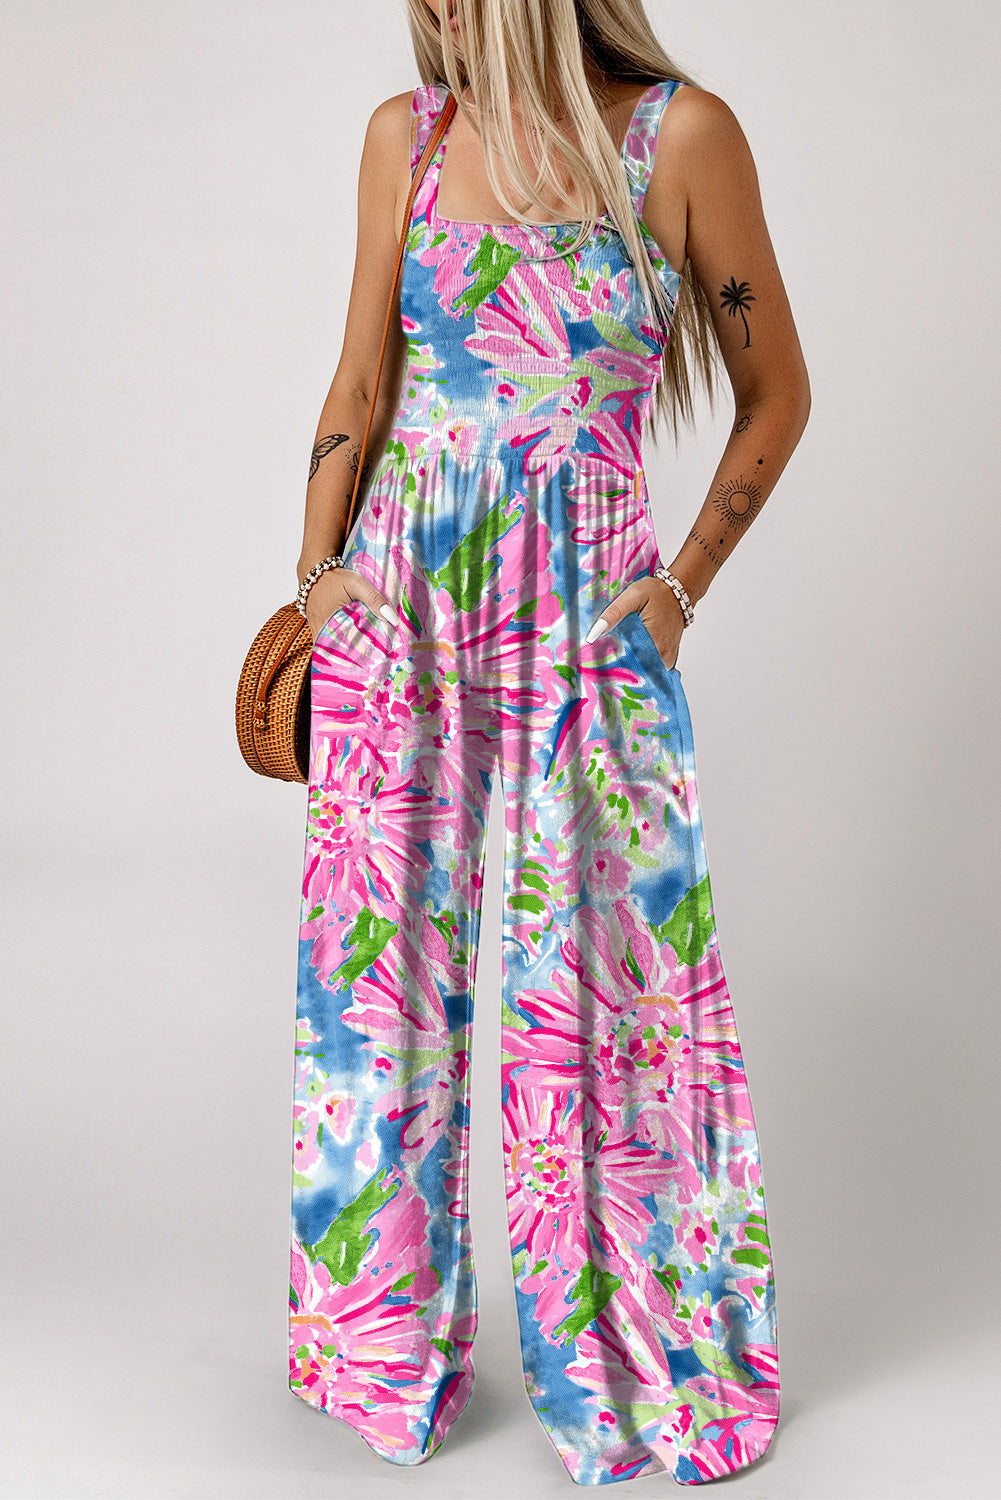 Floral Smocked Square Neck Jumpsuit with Pockets-Dresses-Grace & Blossom Boutique, a women's online fashion boutique located in Odessa, Florida